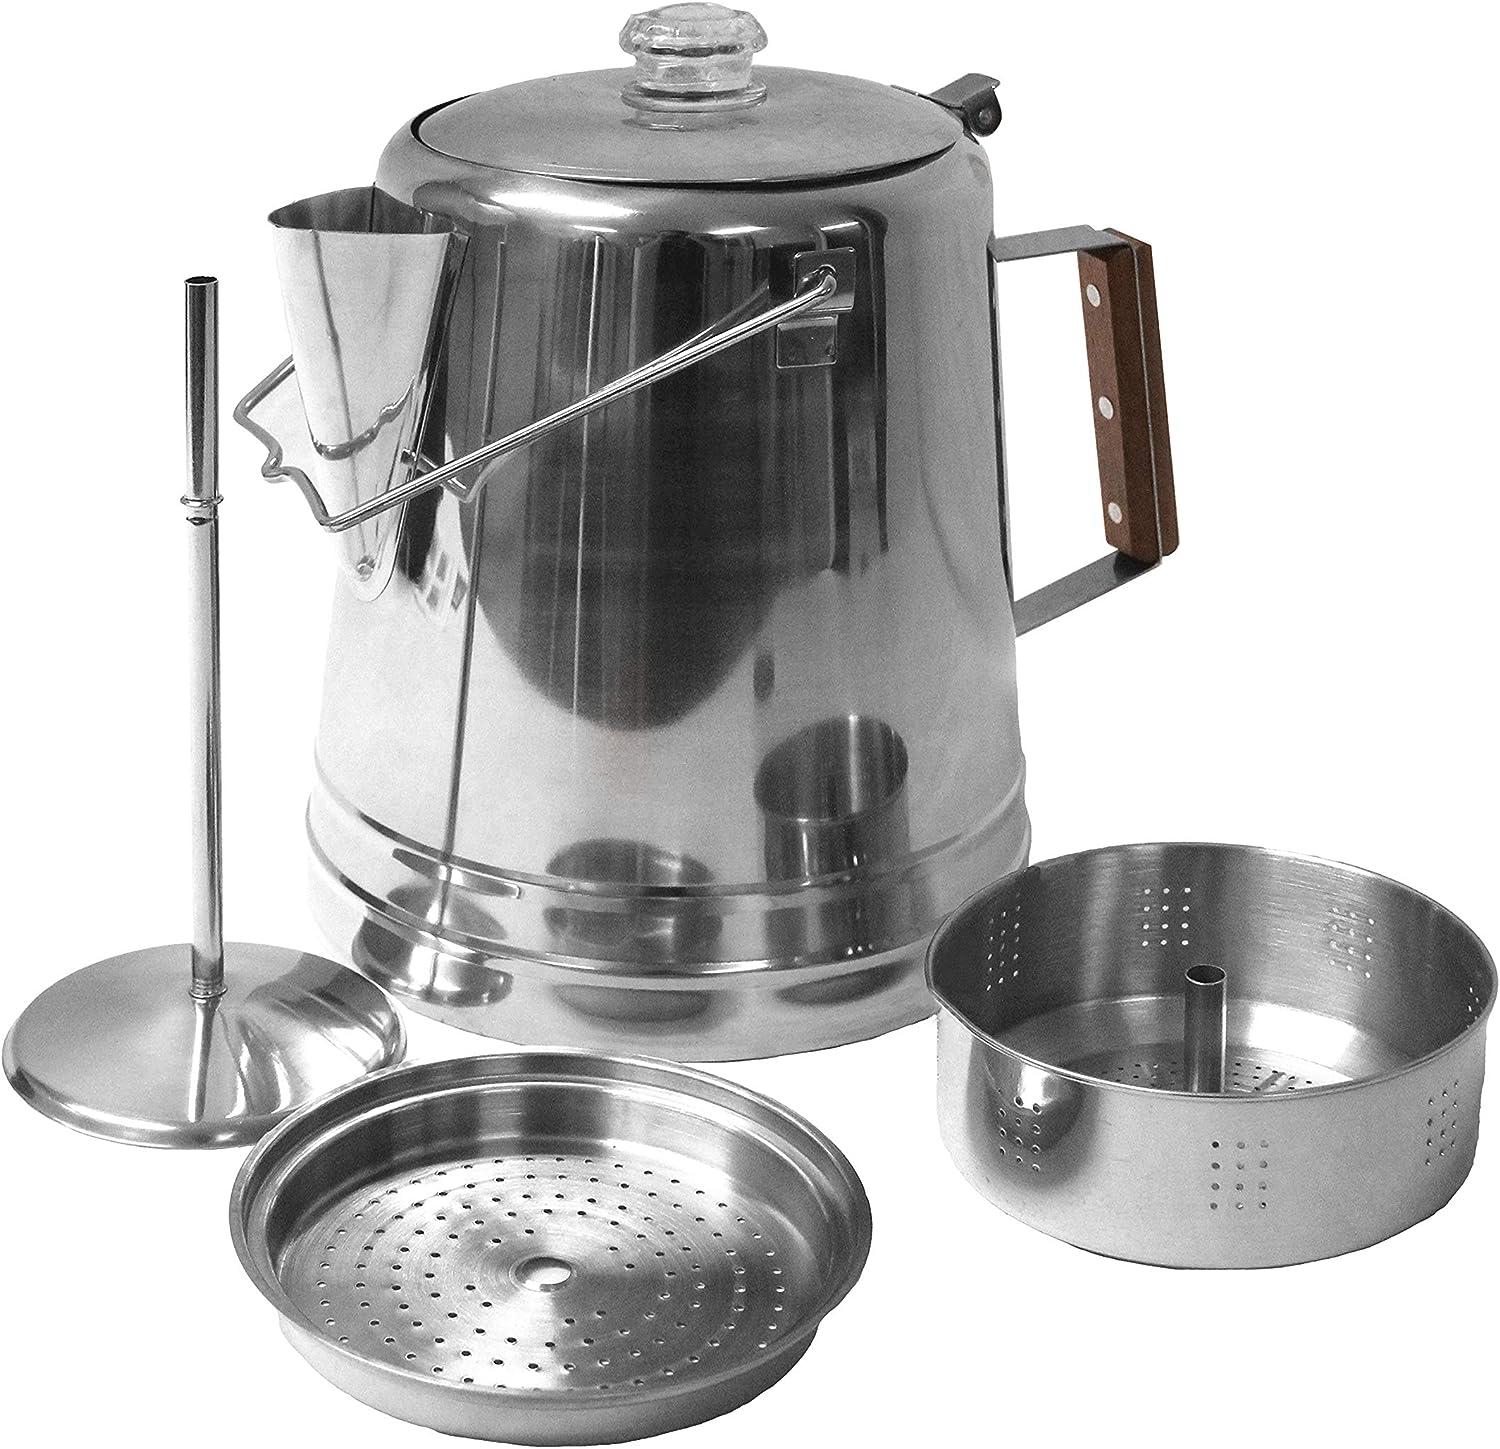 Stansport 28-Cup Stainless Steel Percolator Coffee Pot